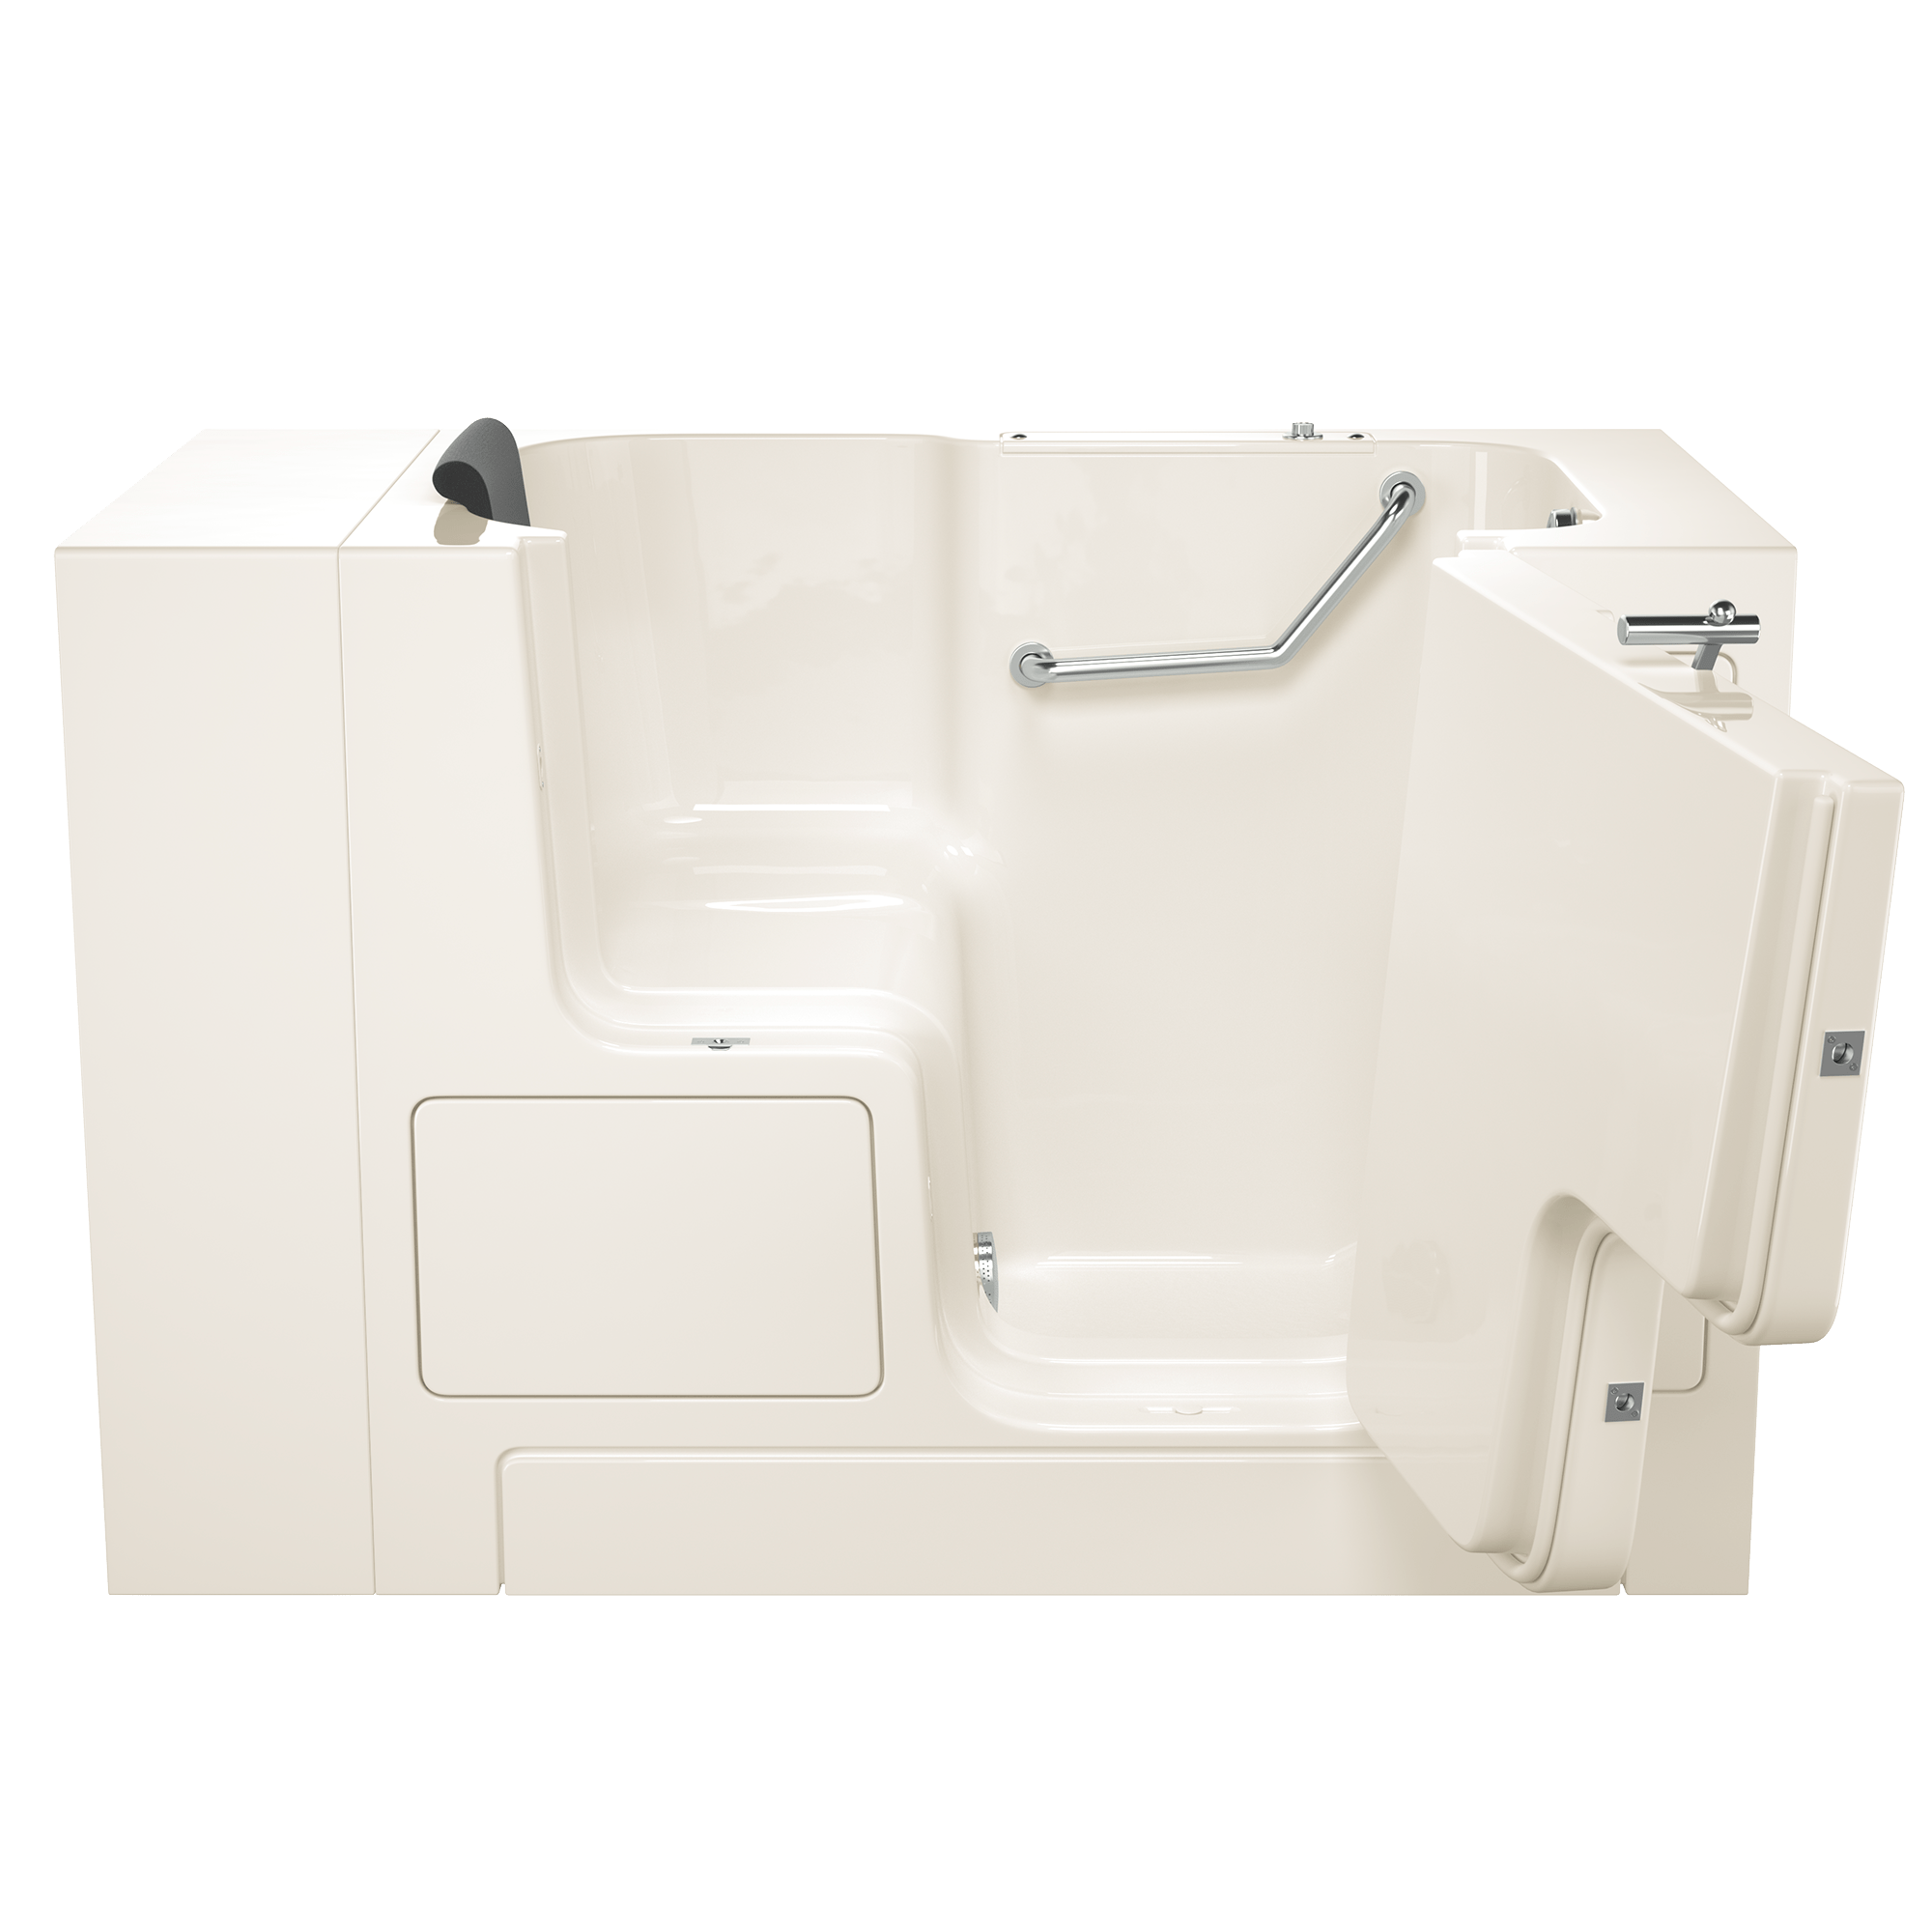 Gelcoat Premium Series 32 x 52 -Inch Walk-in Tub With Soaker System - Right-Hand Drain